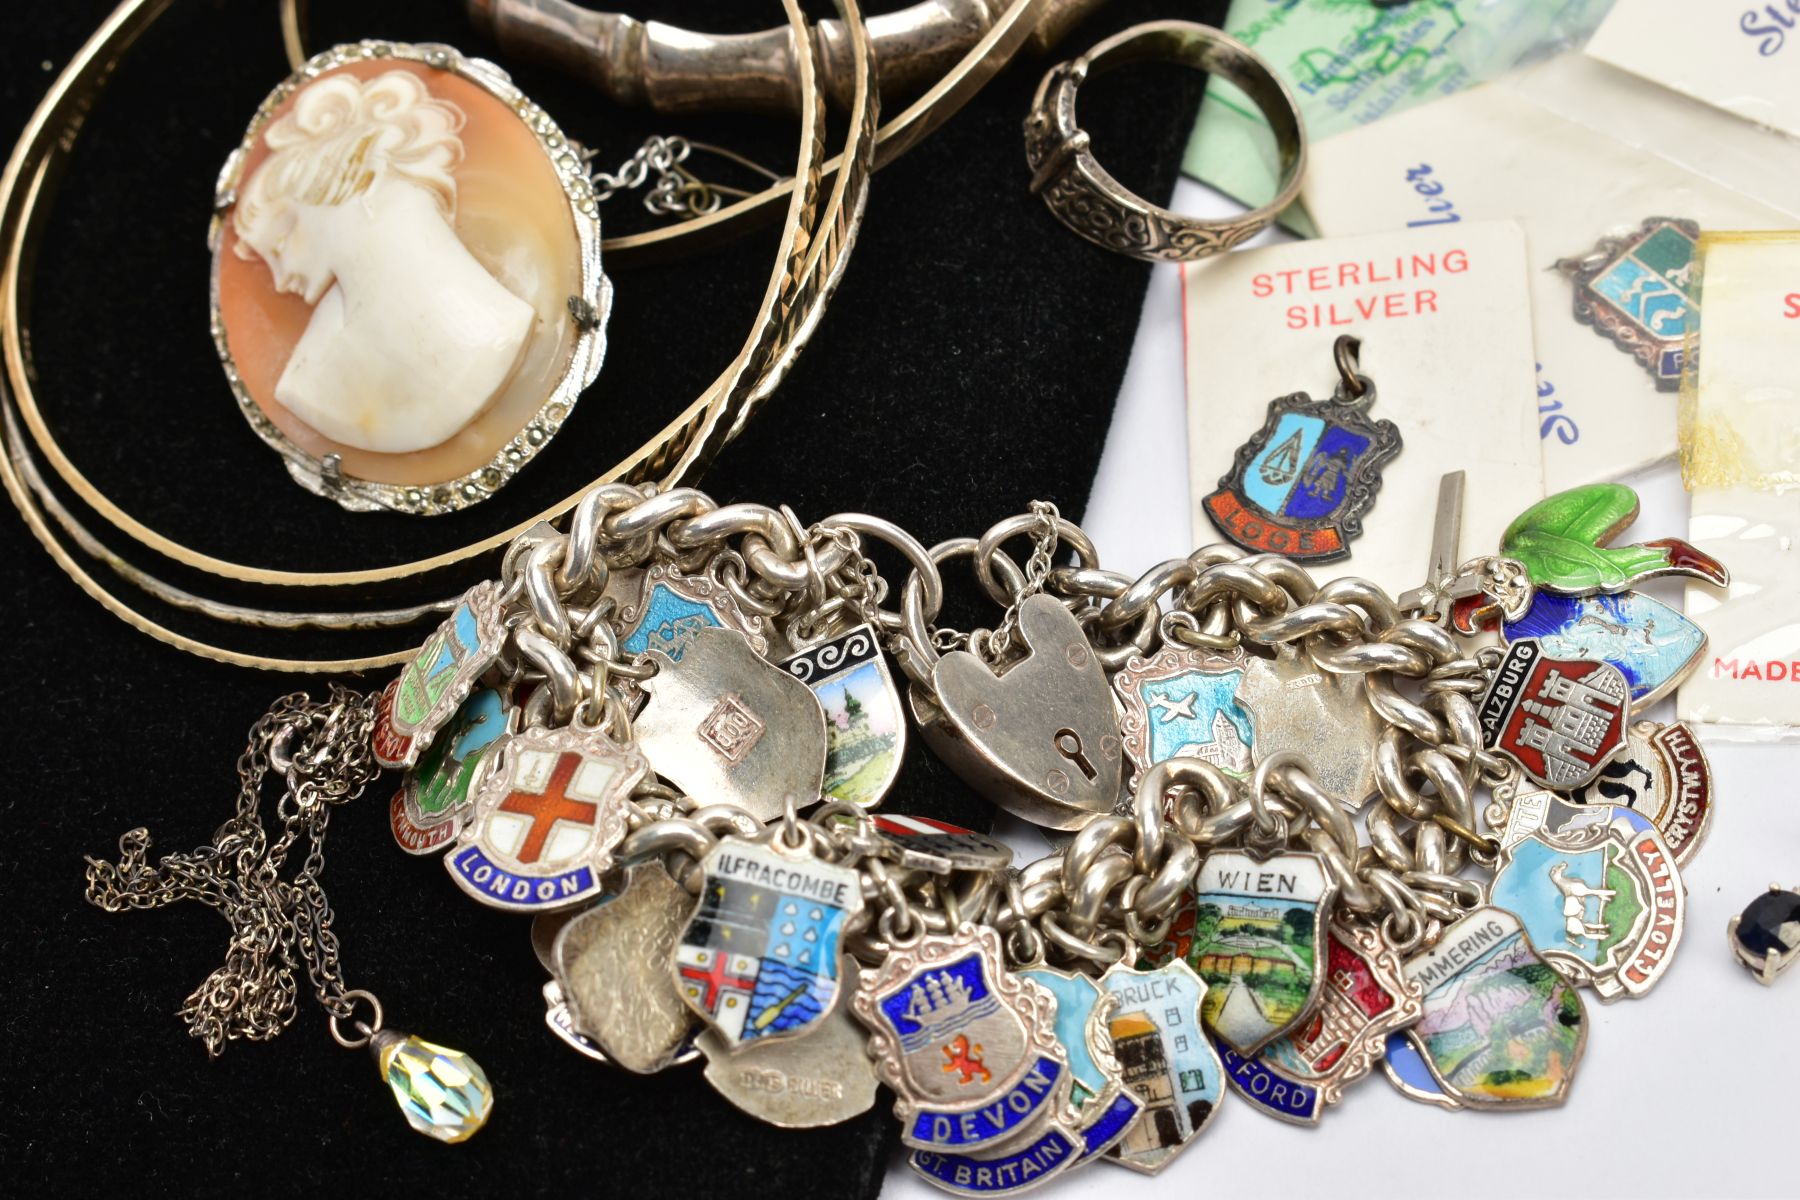 A SILVER BAMBOO BANGLE, CHARM BRACELET, CHARMS AND OTHER JEWELLERY, hinged bangle shaped with a - Image 2 of 6